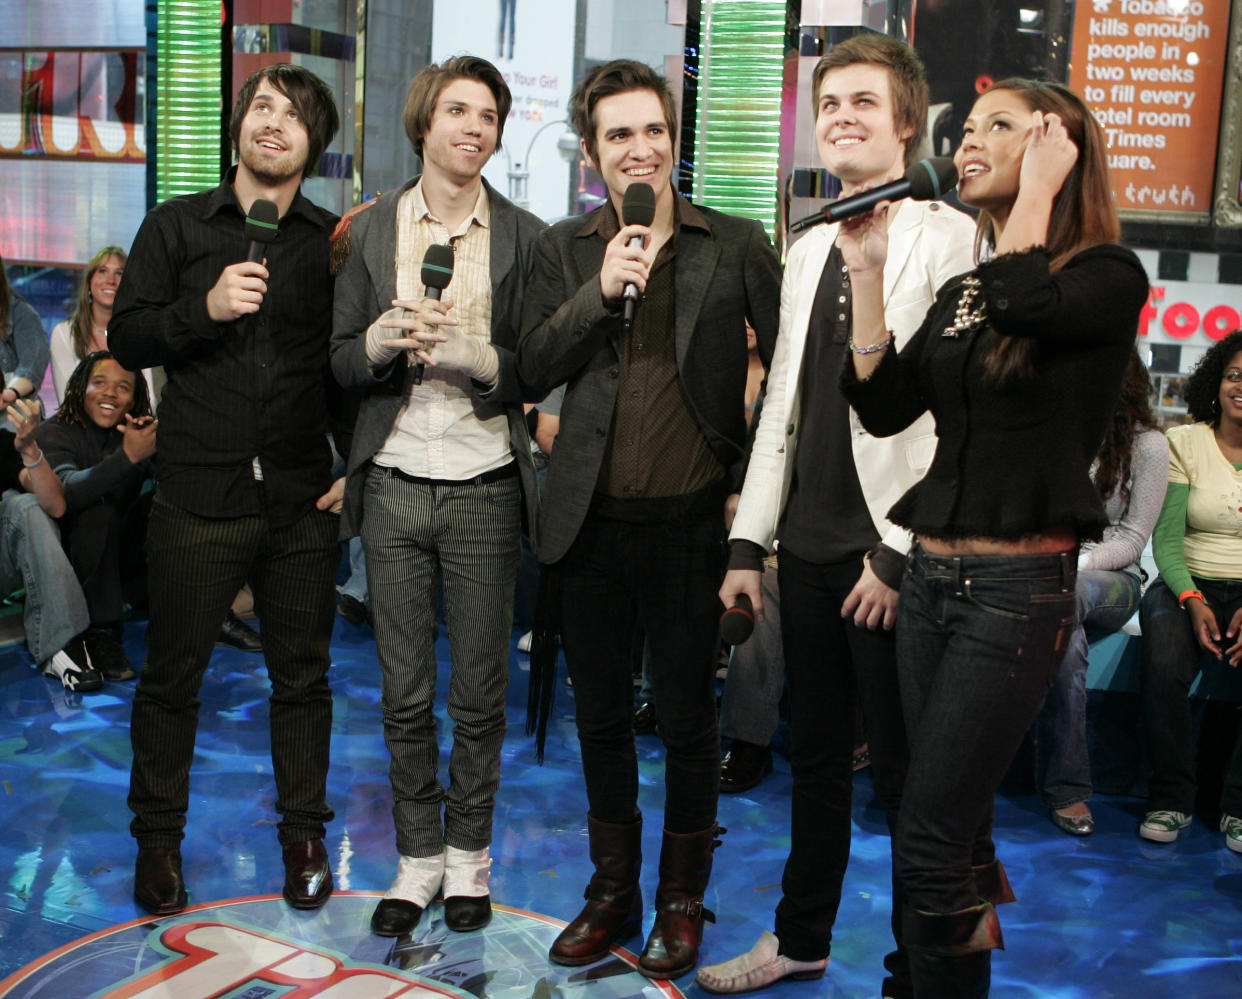 FILE - Members of "Panic! at the Disco," from left, Brent Wilson, Ryan Ross, Brendon Urie and Spencer Smith appear with host Vanessa Minnillo during MTV's "Total Request Live" show in New York on Nov. 14, 2006. Urie, the only musician left from the original group, announced on the band’s Instagram page Tuesday that Panic! at the Disco “will be no more.” Urie shared that he and his wife, Sarah, are expecting a baby and that he plans to focus on his family. (AP Photo/Jeff Christensen, File)